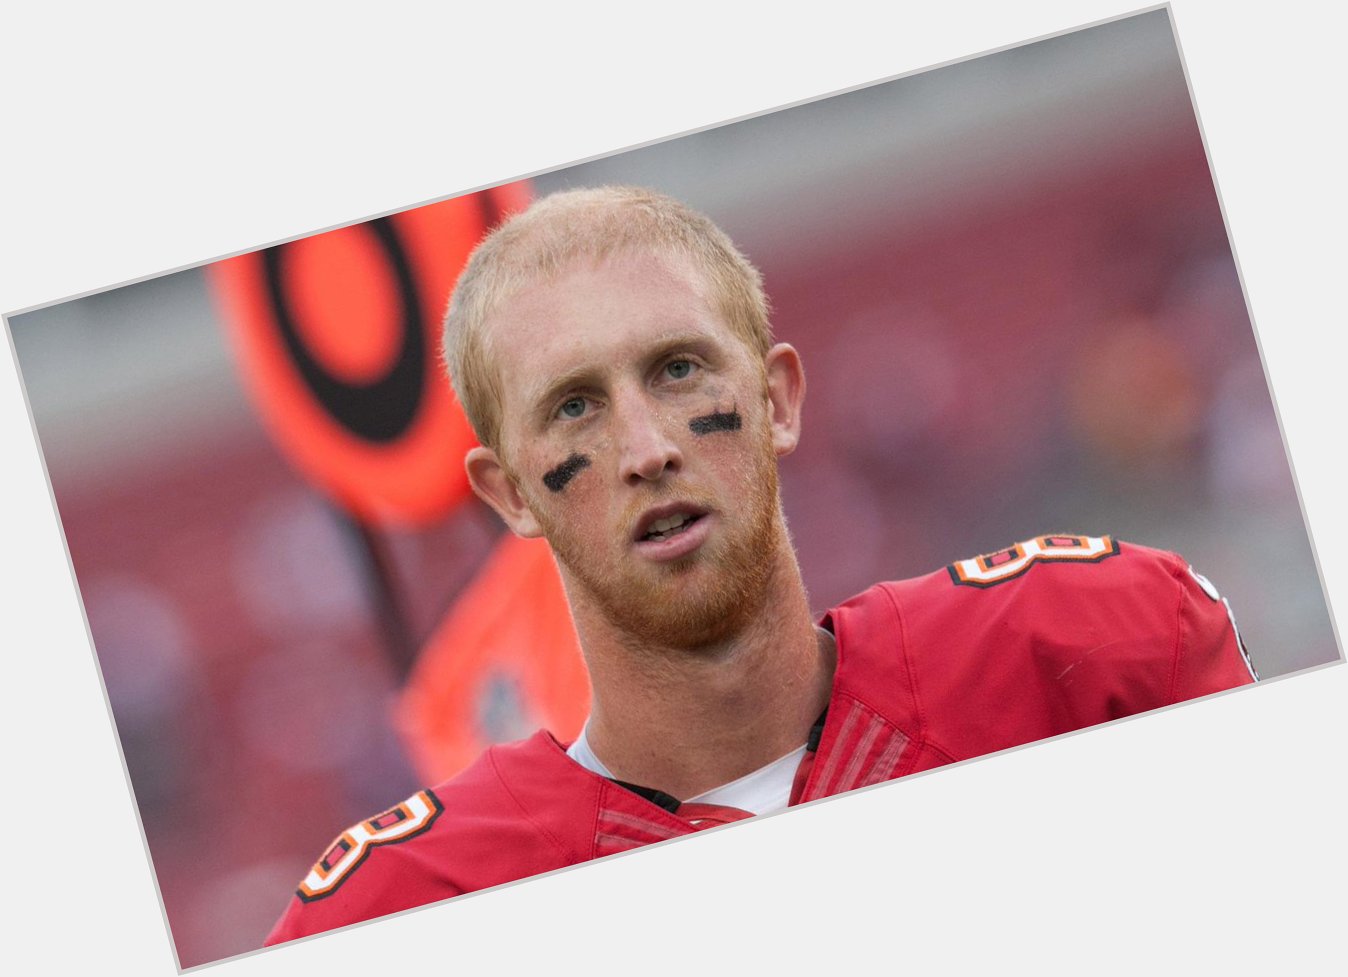 Happy 25th birthday to the one and only Mike Glennon! Congratulations 